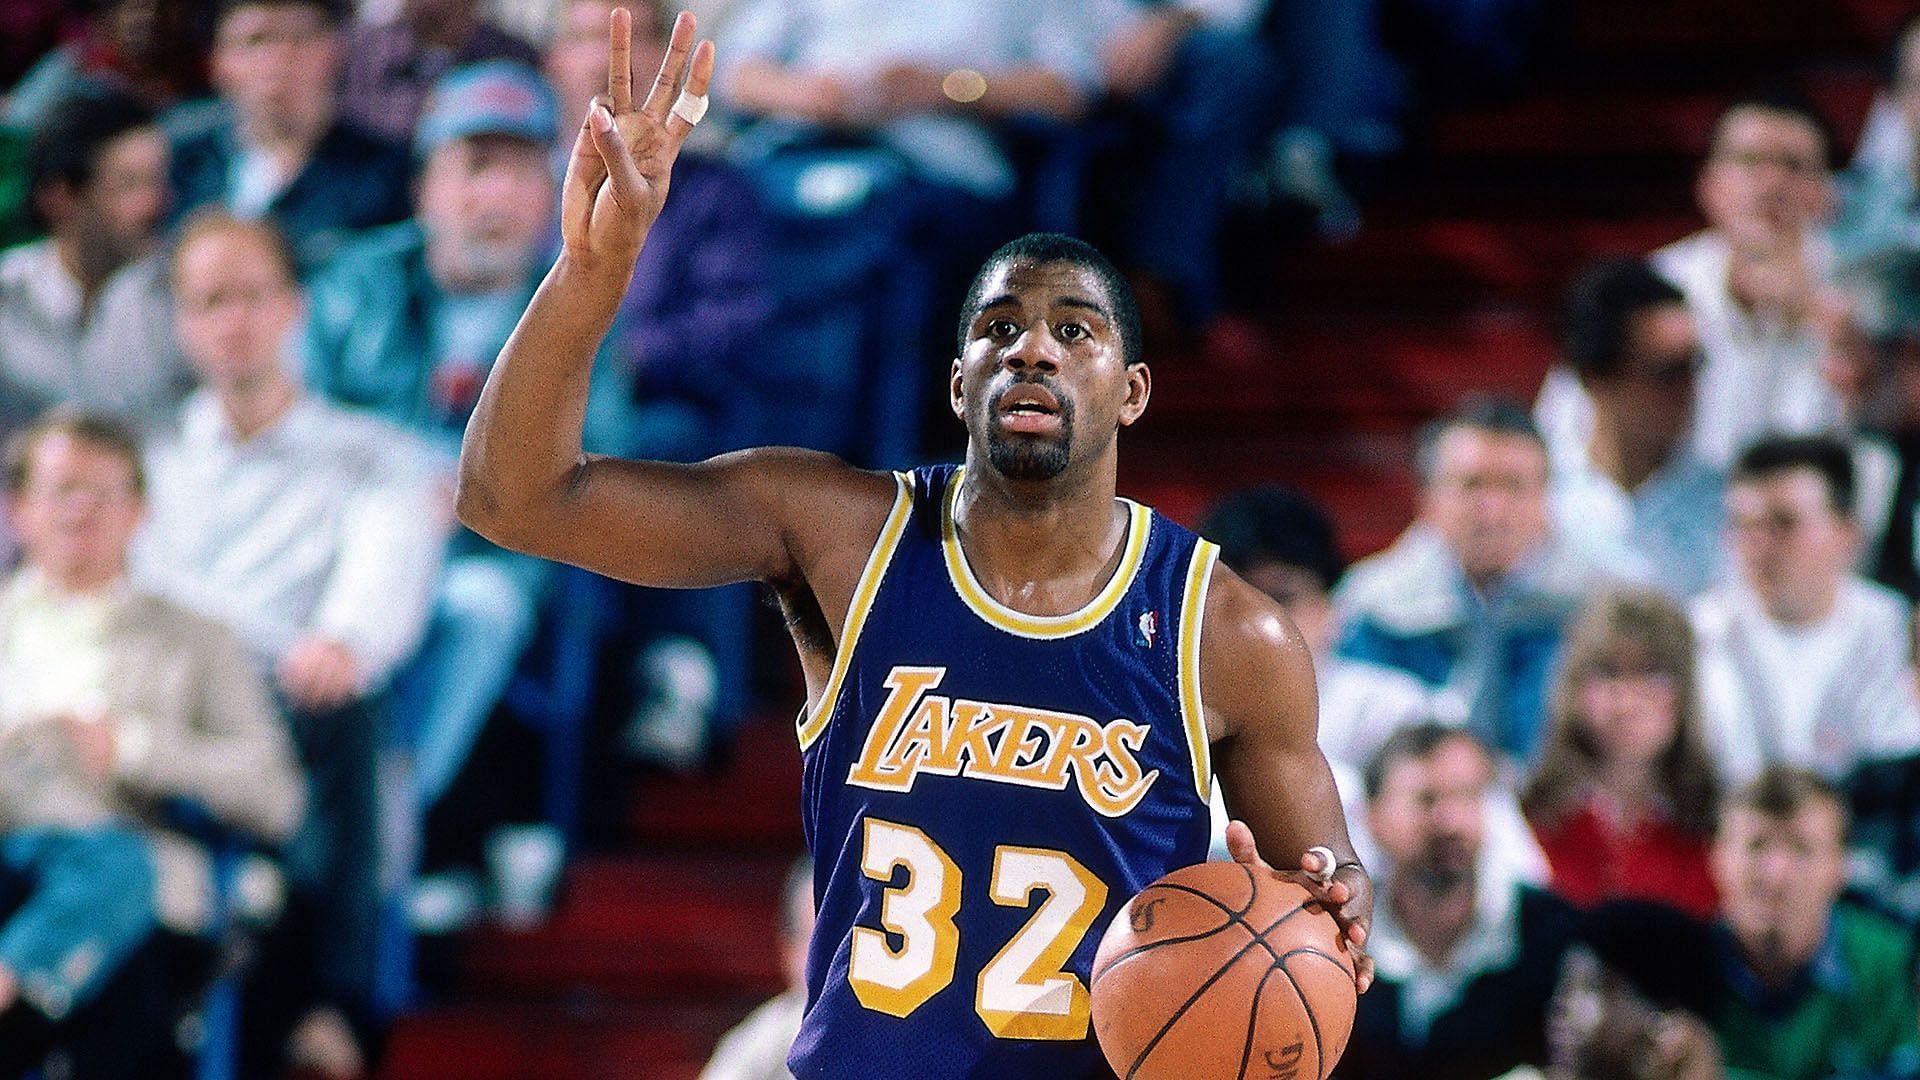 NBA 75: At No. 5, Magic Johnson combined dazzling playmaking with charisma  to lead the Showtime Lakers to five titles - The Athletic